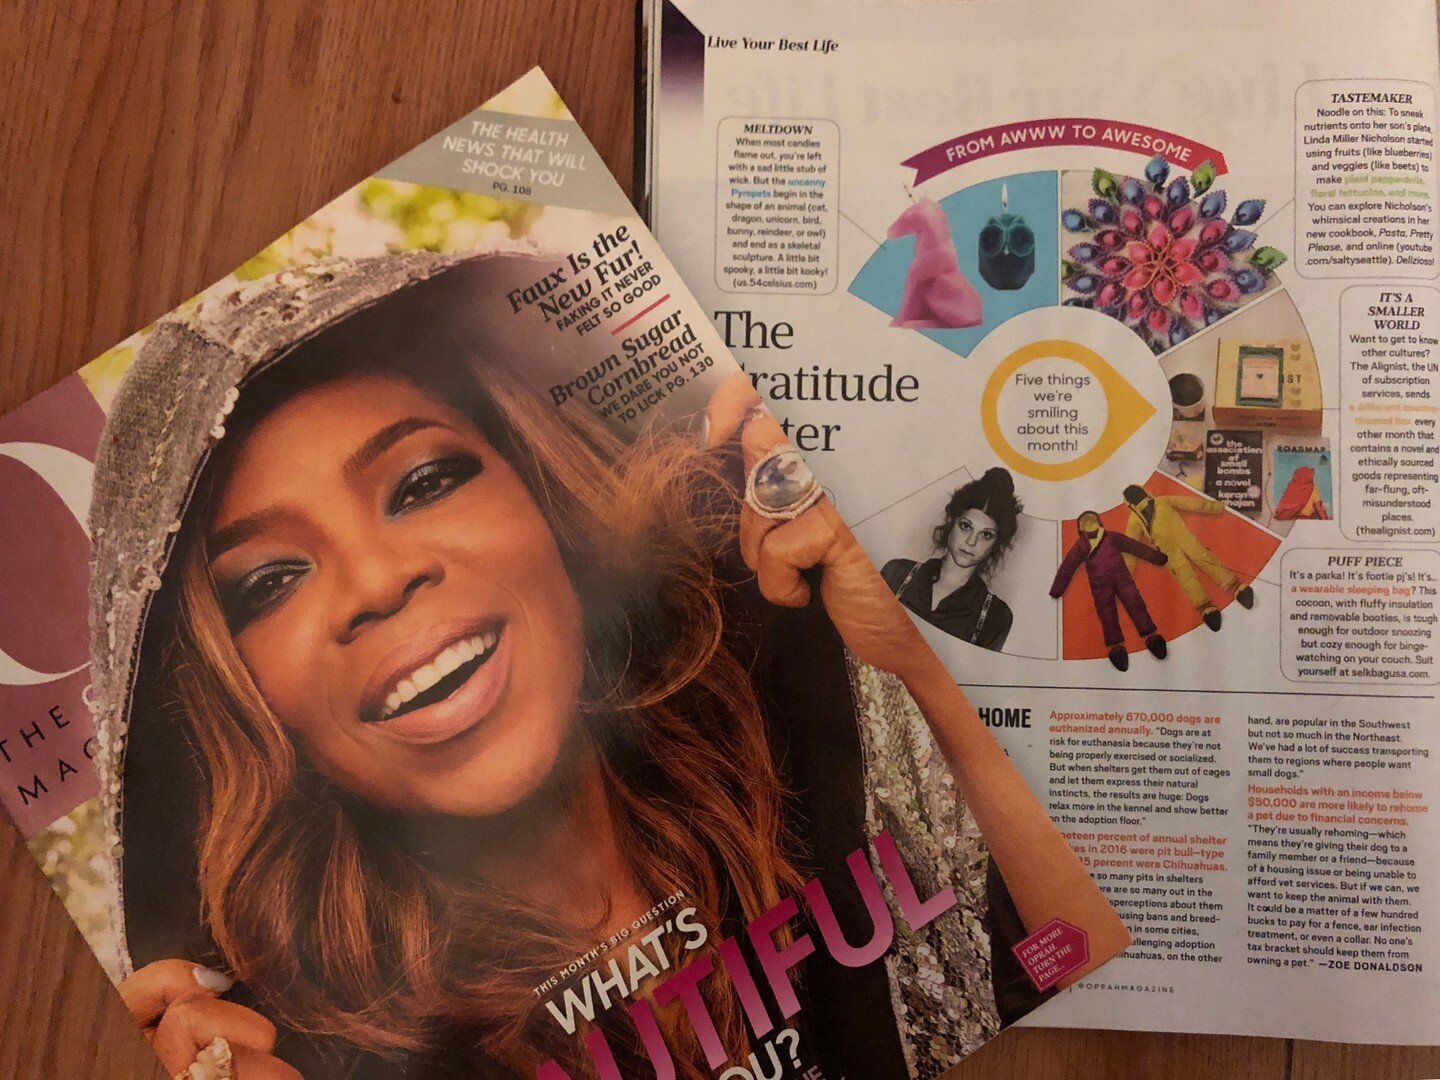 Throwback to when we were featured in @oprah magazine! #neverforget 🥰😍